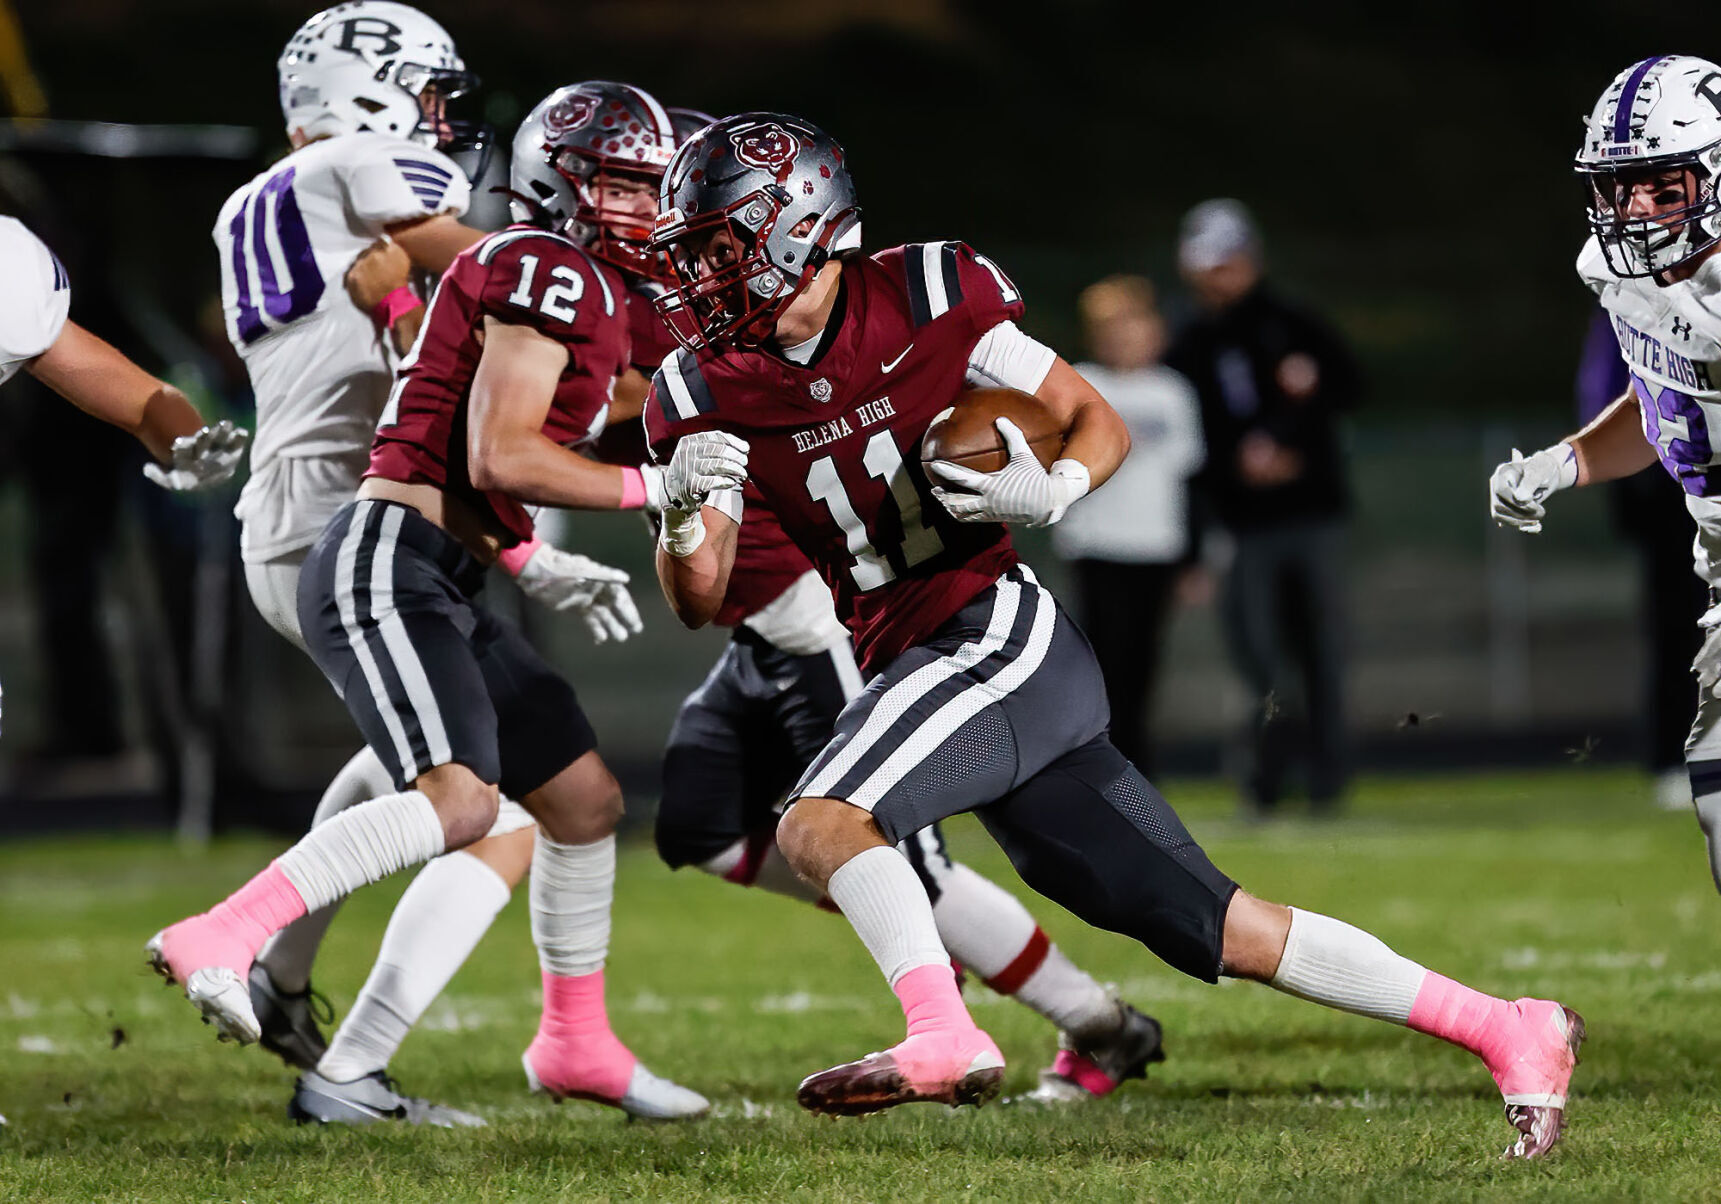 Helena Capital vs. Butte: Battle for the No. 1 Seed in Western AA Football